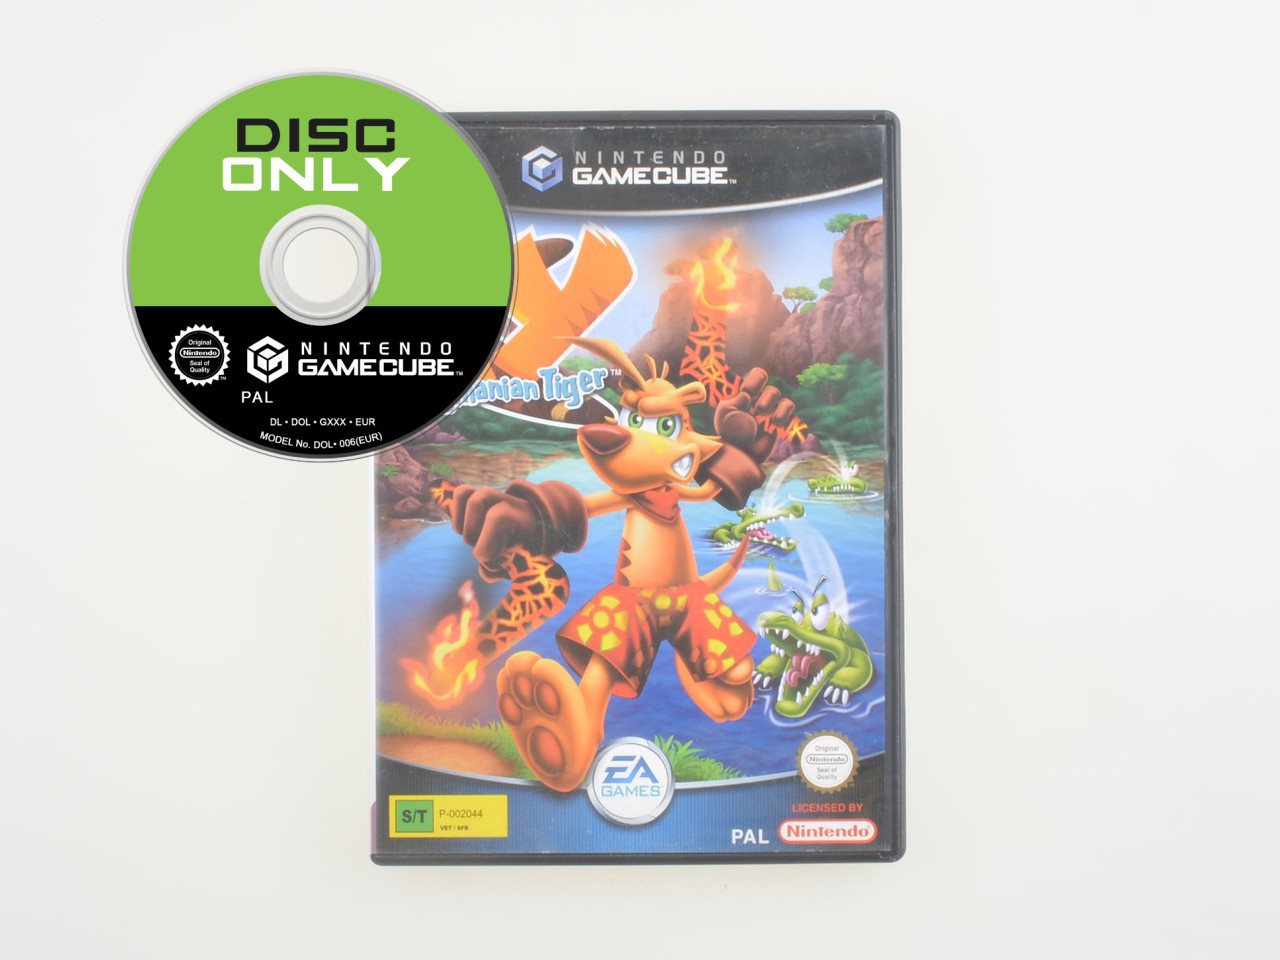 TY The Tasmanian Tiger - Disc Only Kopen | Gamecube Games